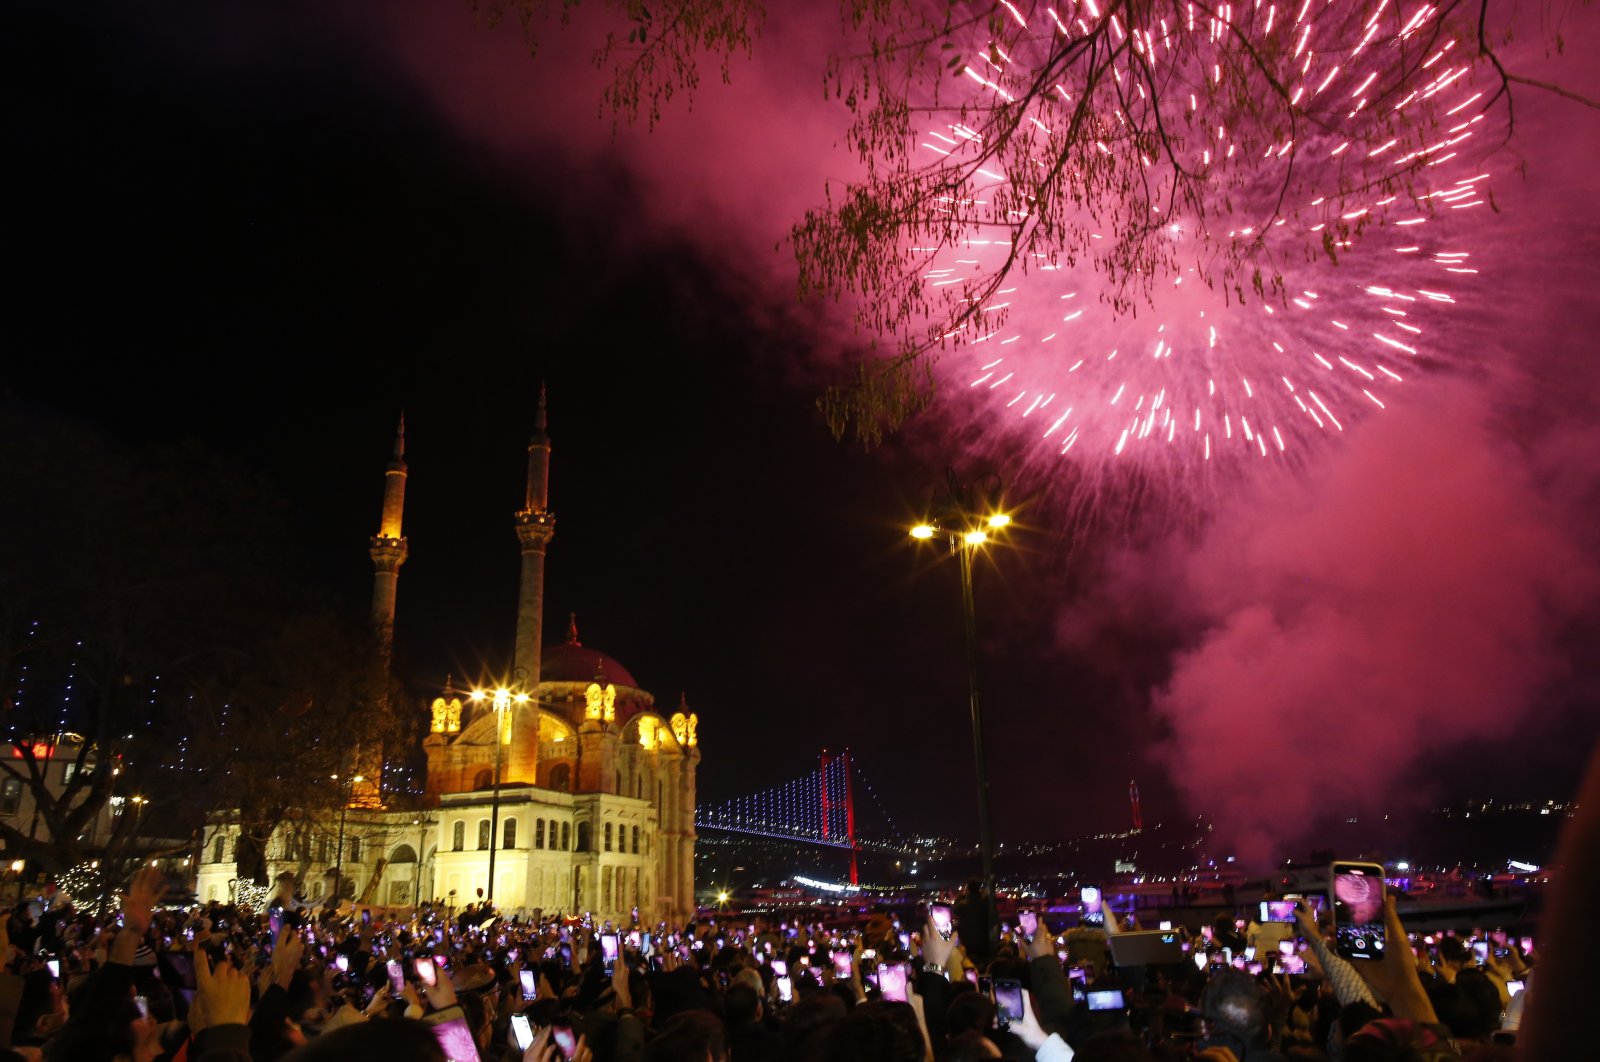 Fireworks explode over the Mecidiye mosque in Ortaköy Square, in Istanbul, Turkey, Jan. 1, 2022. (AP Photo)